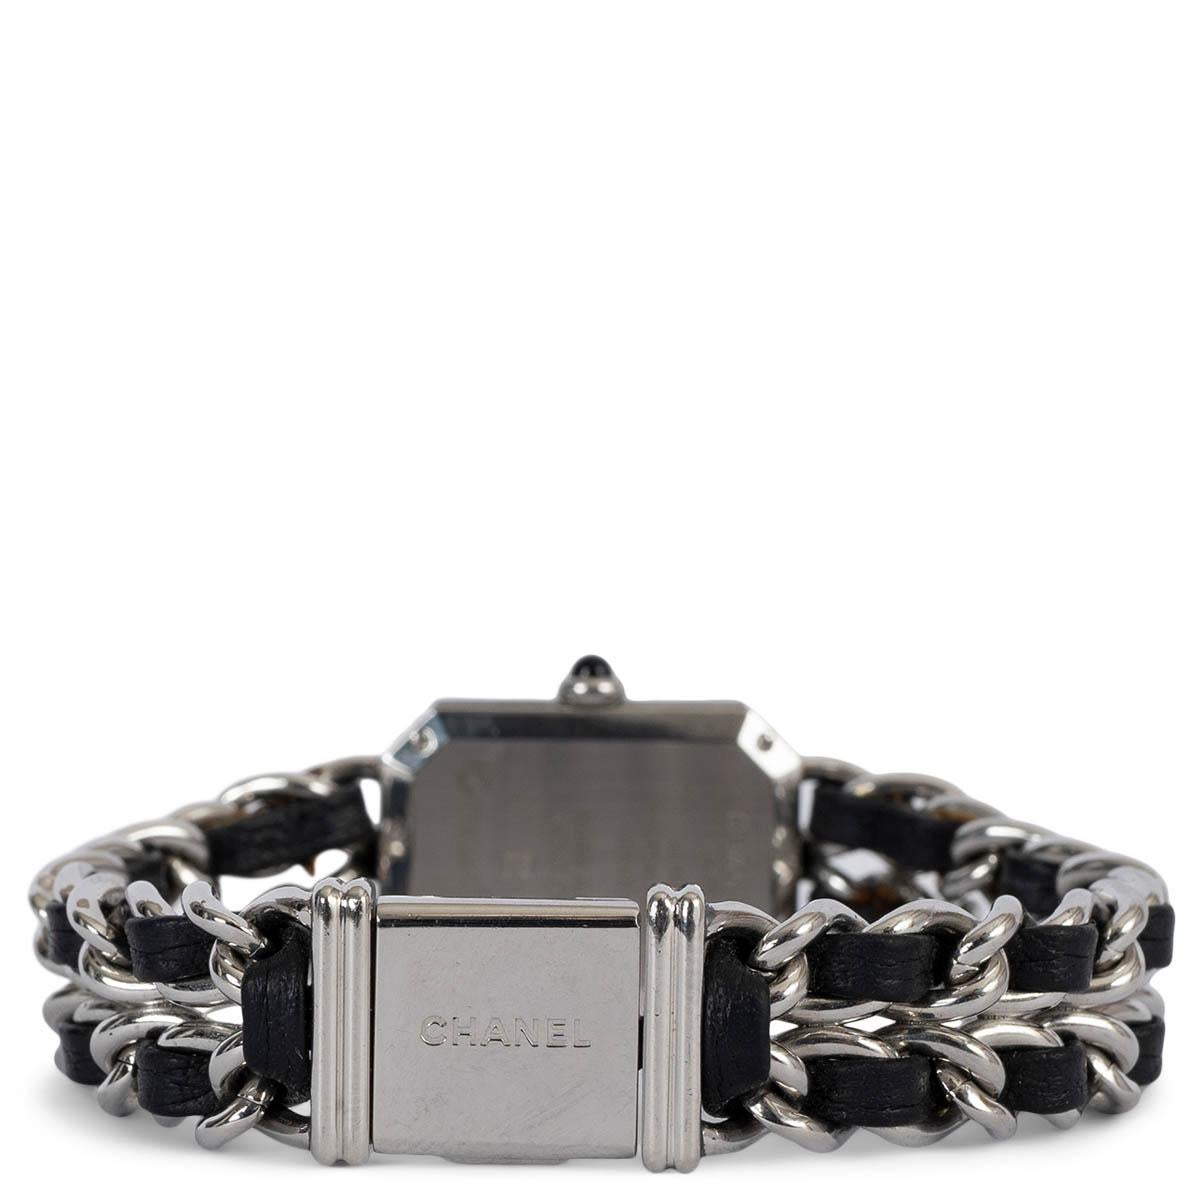 Women's CHANEL stainless steel & black PREMIERE ICON CHAIN Watch For Sale